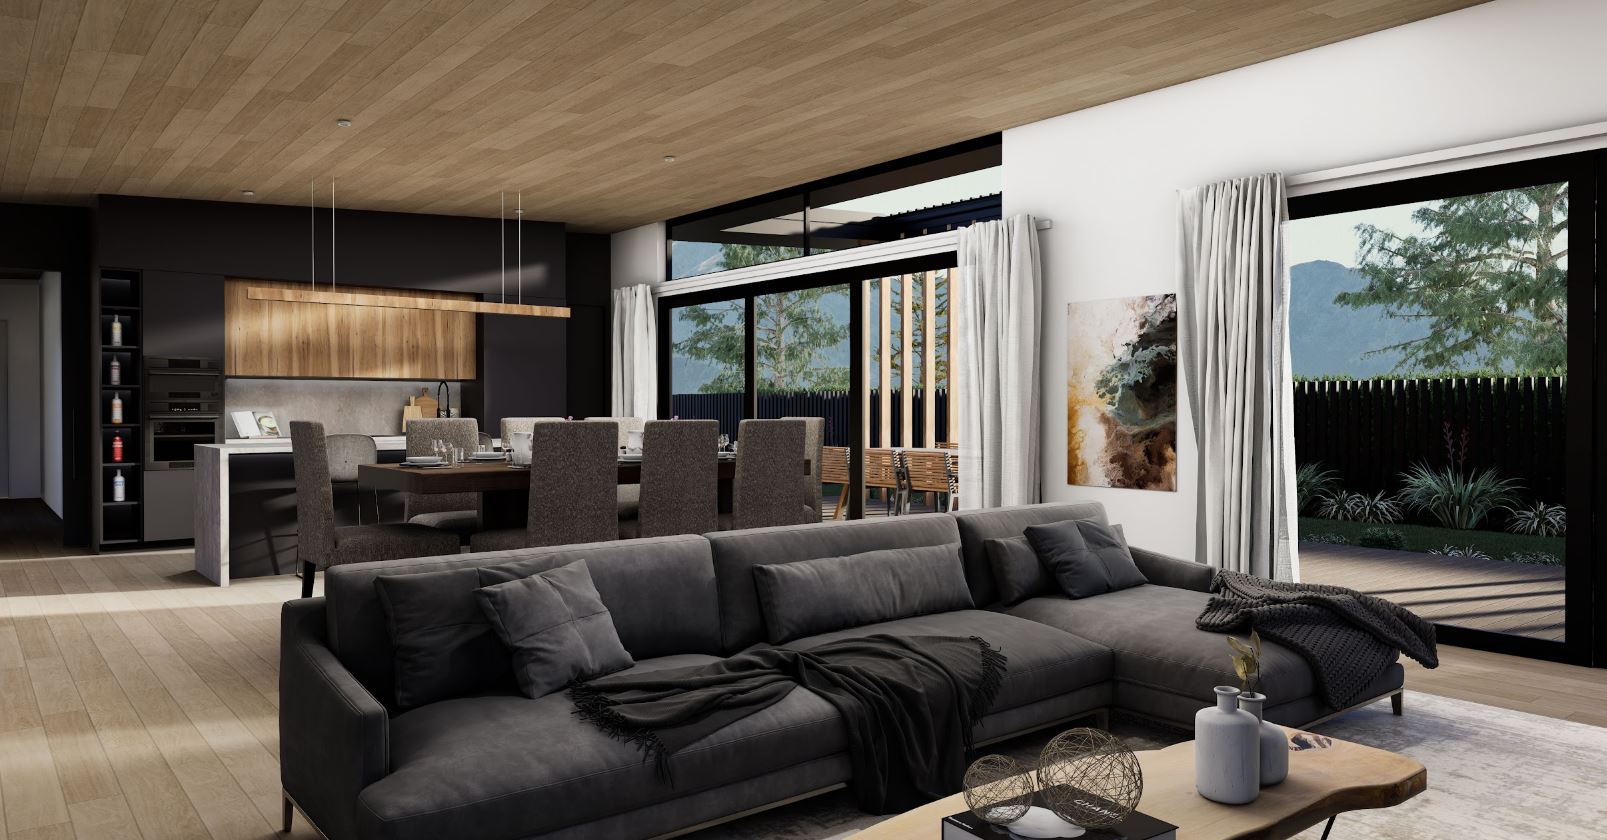 Richmond House Floor Plan Living Room View by Hallmark Homes Christchurch Canterbury New Zealand. The perfect blend of elegance and functionality with our Richmond design. Indoor and outdoor living spaces with a touch of sophistication.